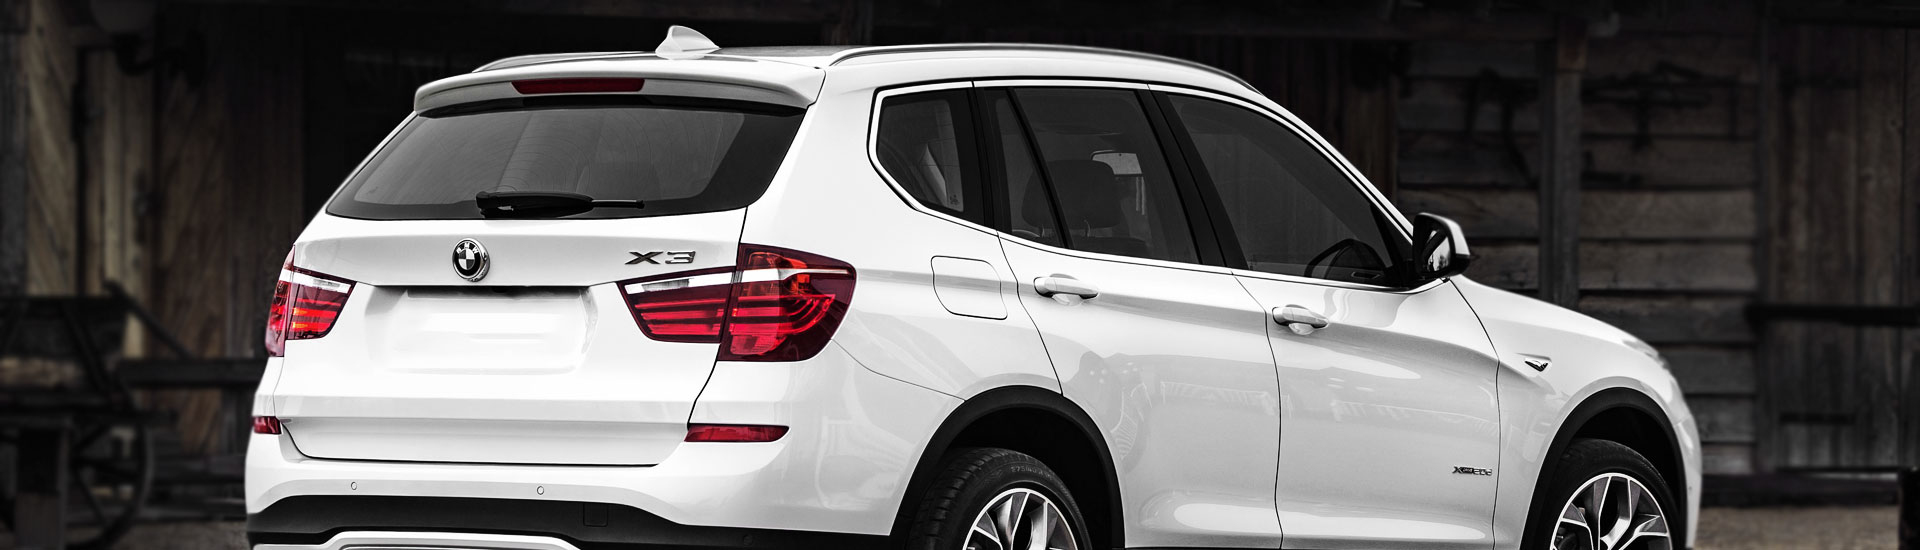 Front Window Film for BMW X3 SUV 2011-2013 Glass Any Tint Shade PreCut VLT